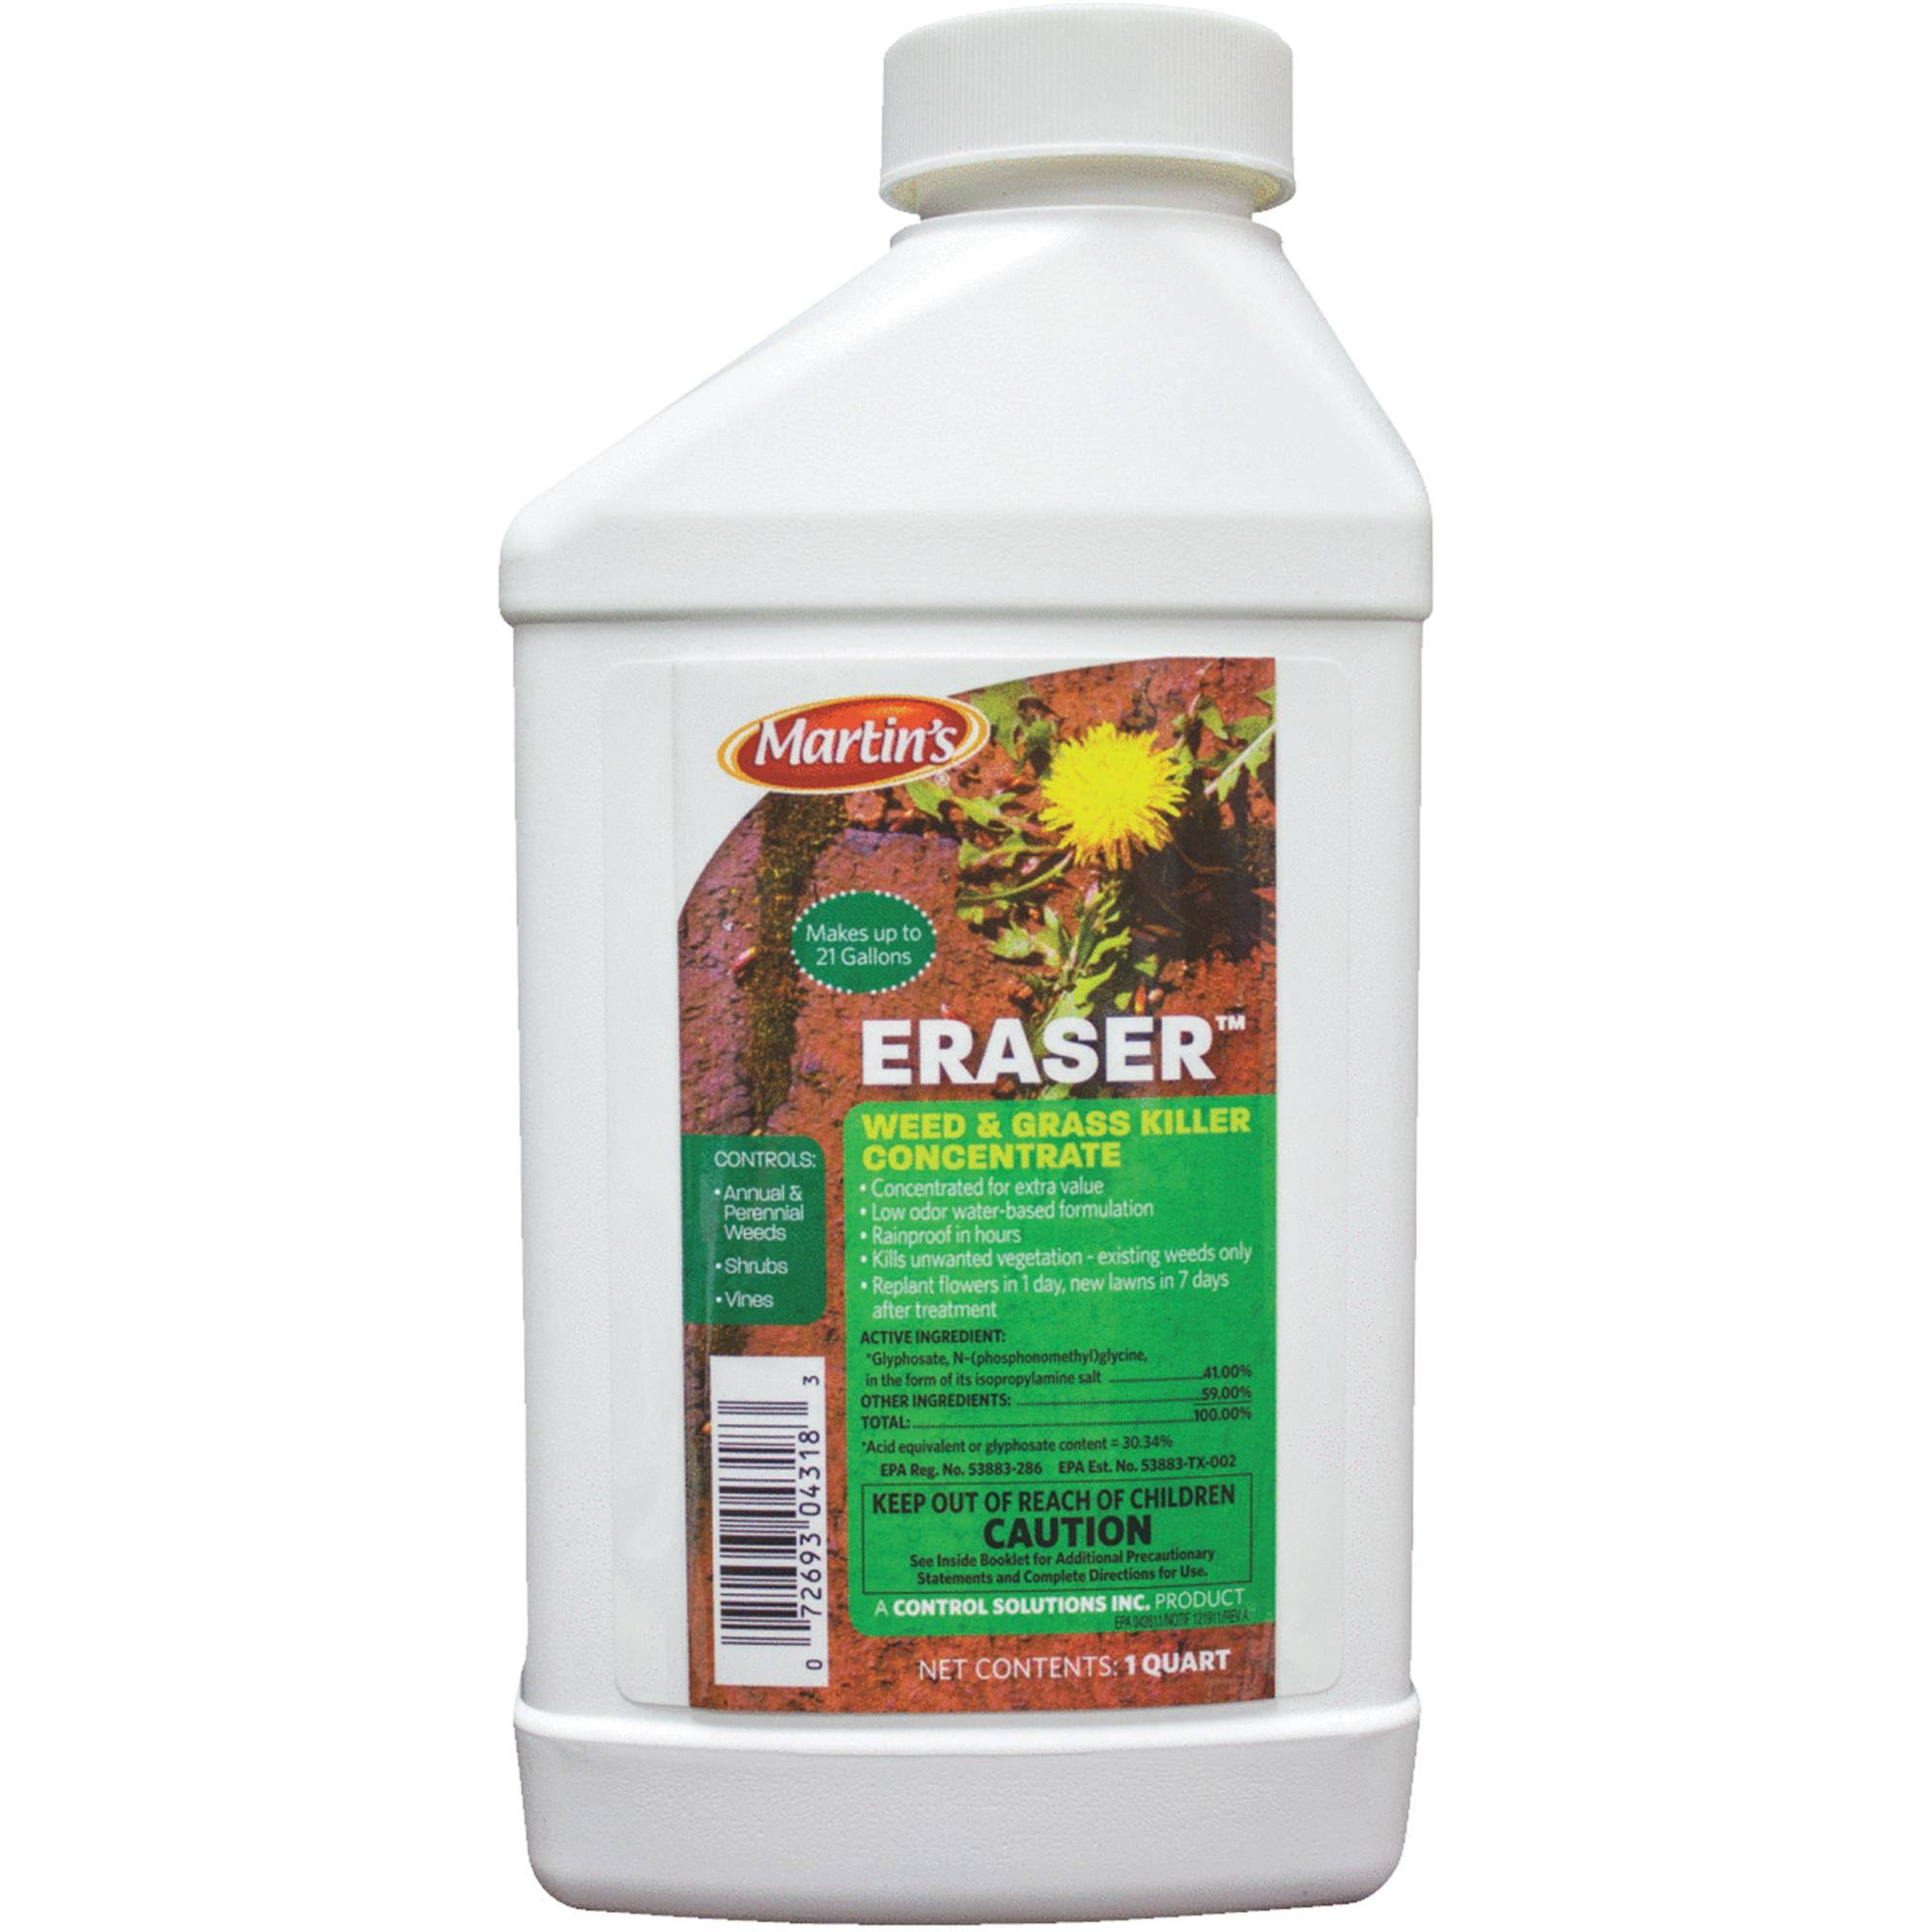 1-Quart Eraser Weed and Grass Killer Concentrate